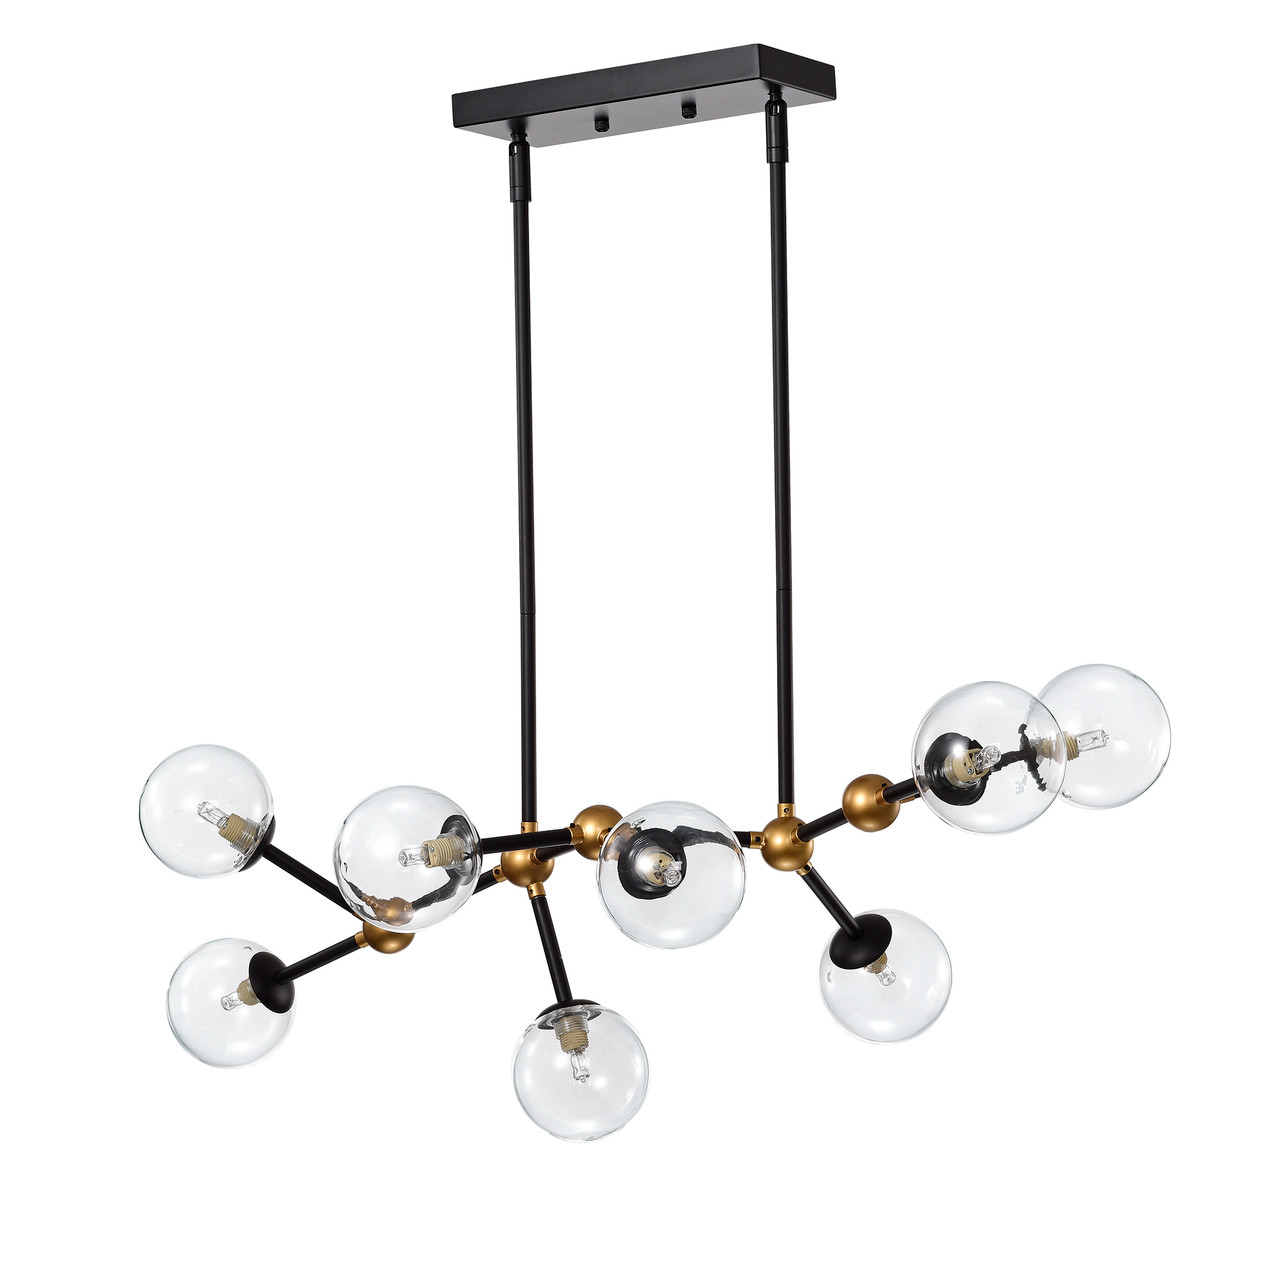 WAREHOUSE OF TIFFANY'S HM248/8BXG Enzo 18.9 in. 8-Light Indoor Matte Black and Gold Finish Chandelier with Light Kit